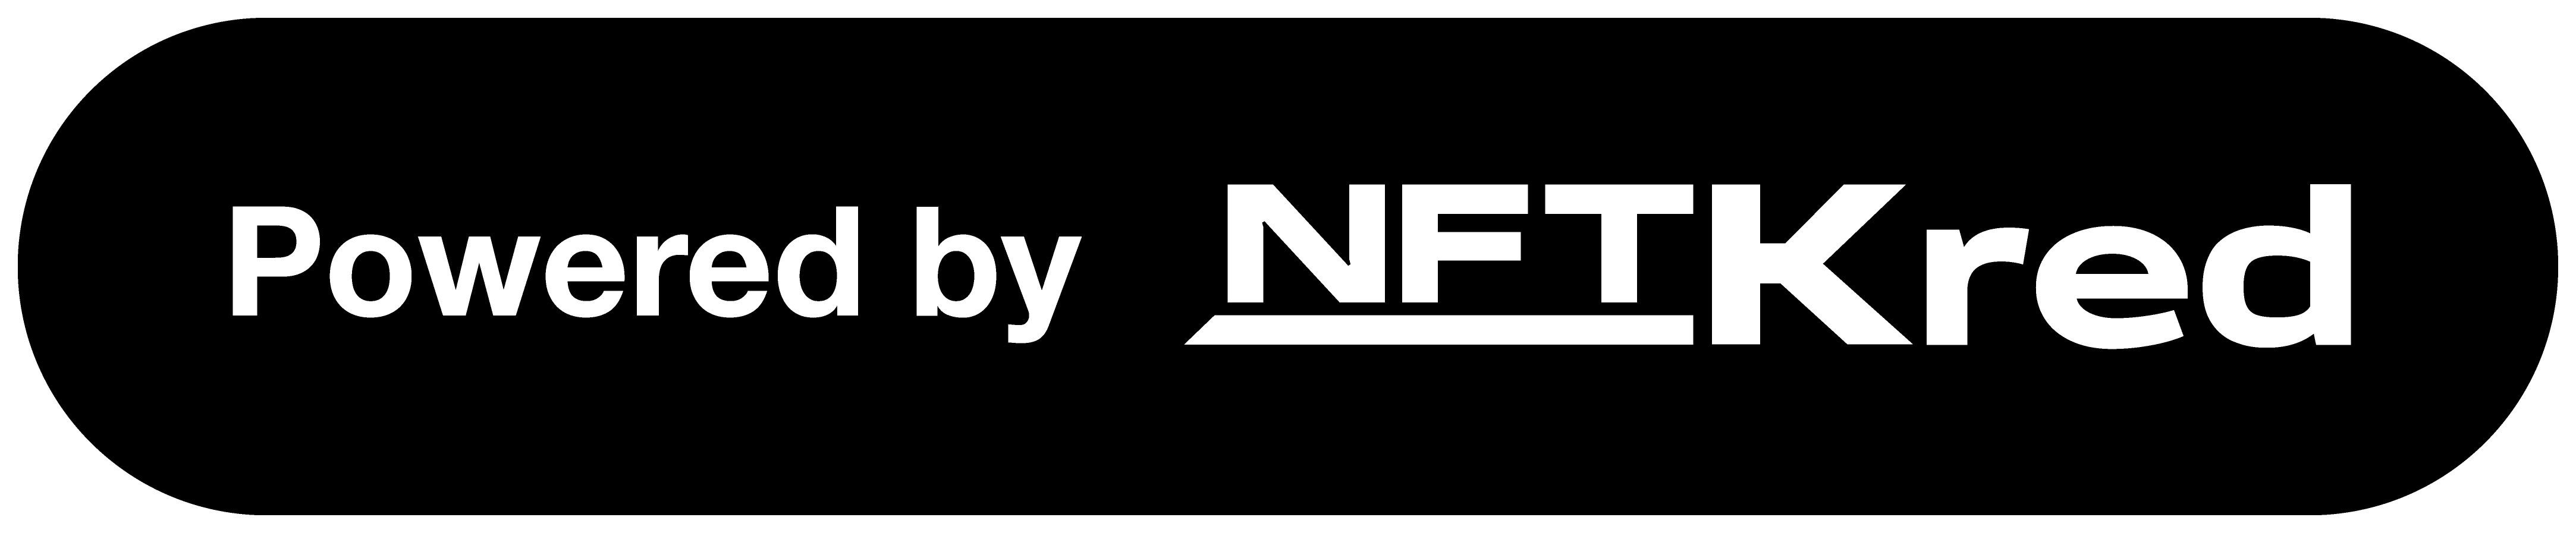 Powered by NFT.Kred